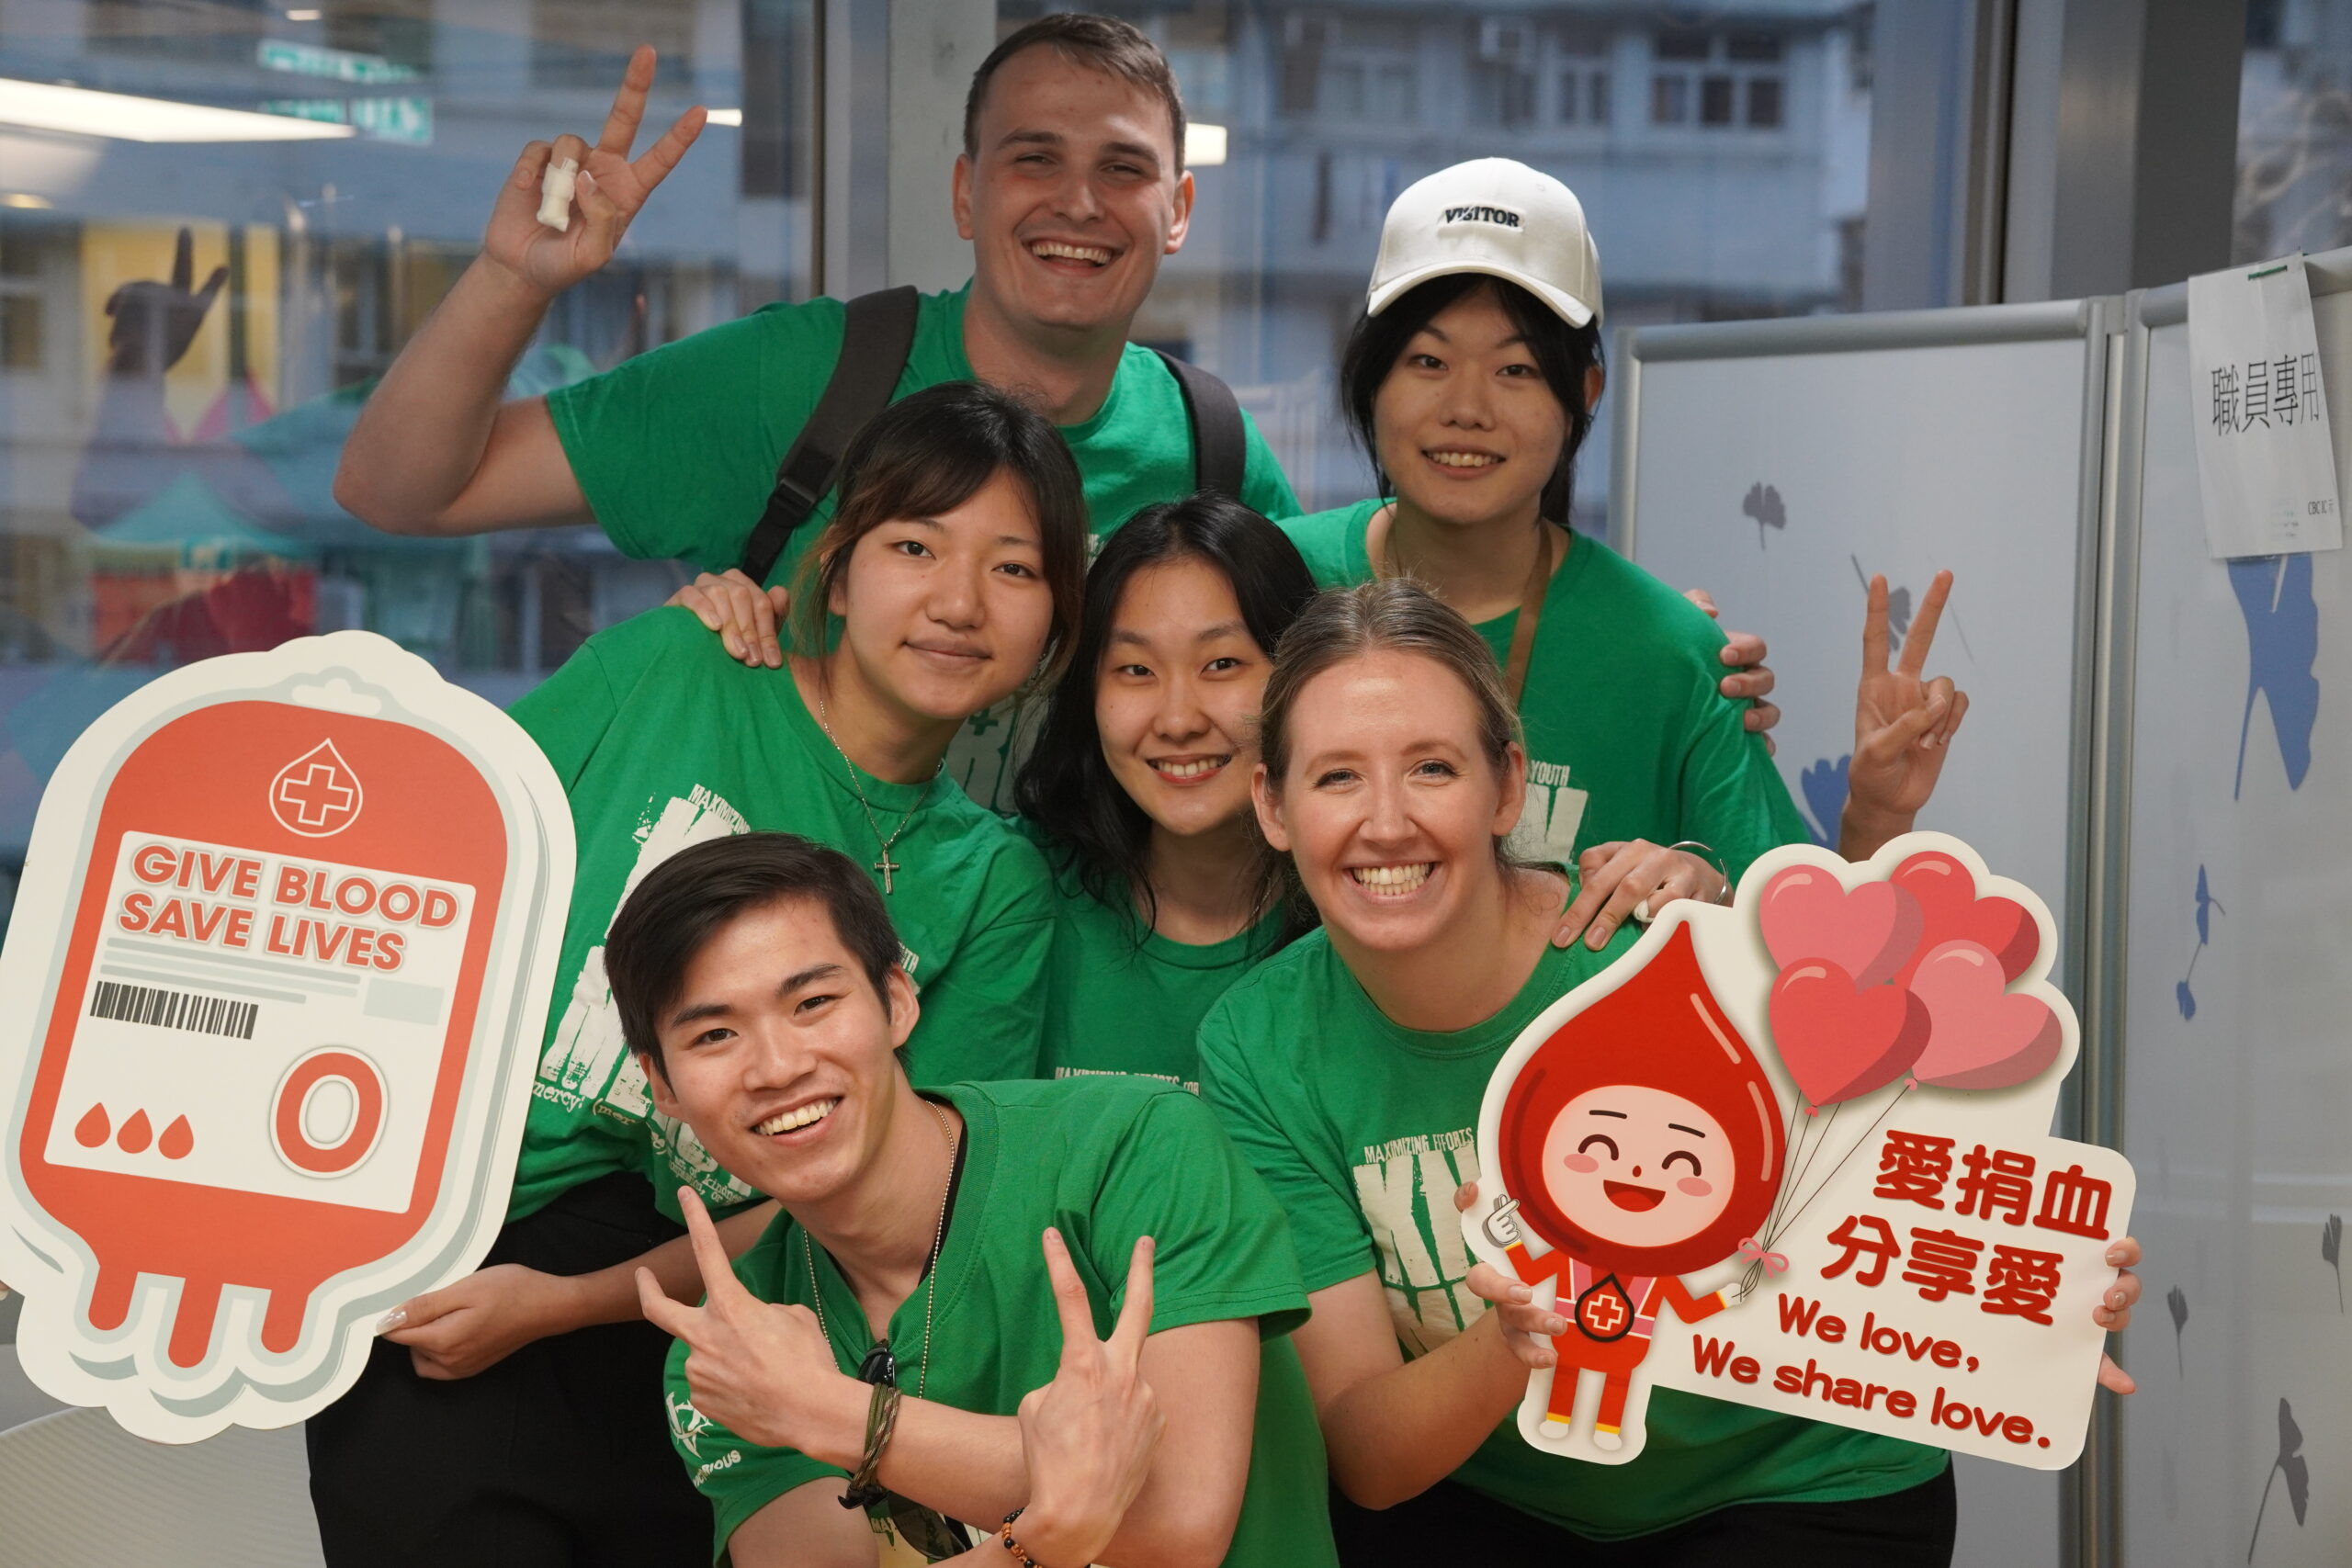 The HKU disciples excited to give their blood!